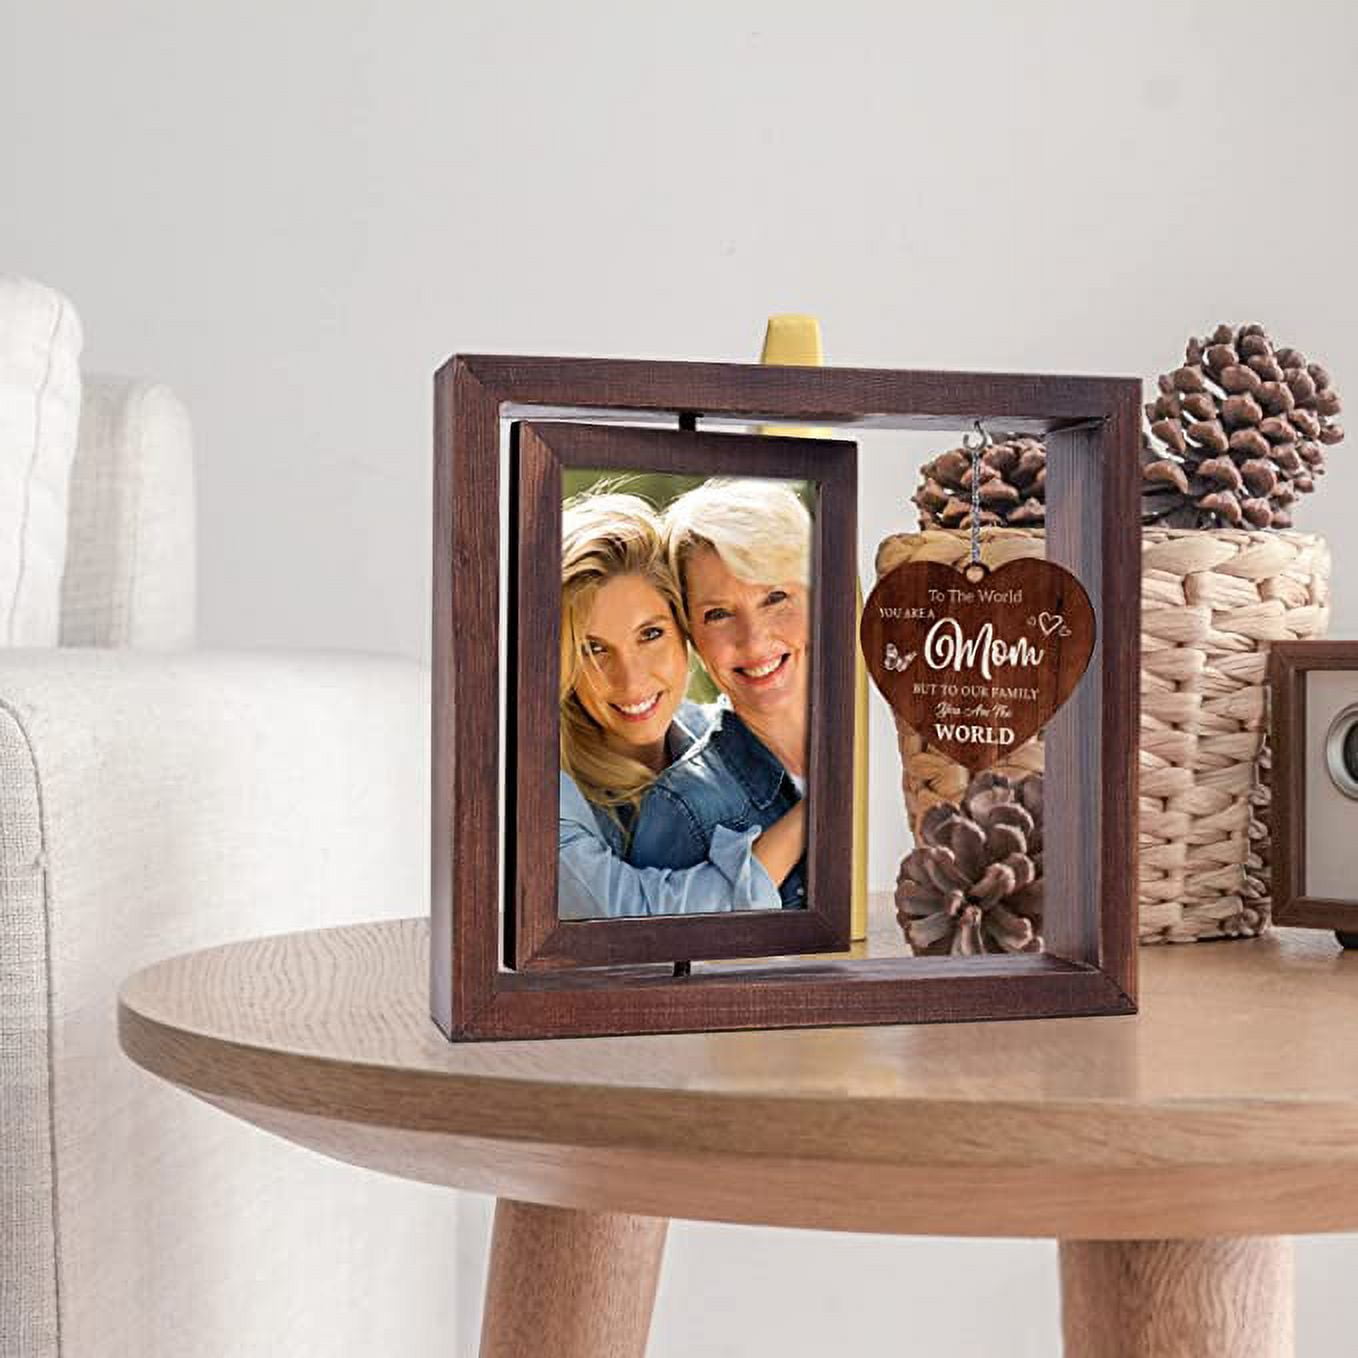 Mom Gifts Christmas Gifts For Mom From Daughter Son, Mother Picture Frame  Double-Sided Display 4x6 Photo with Warm Heart Pendant Mother-In-Law Gifts